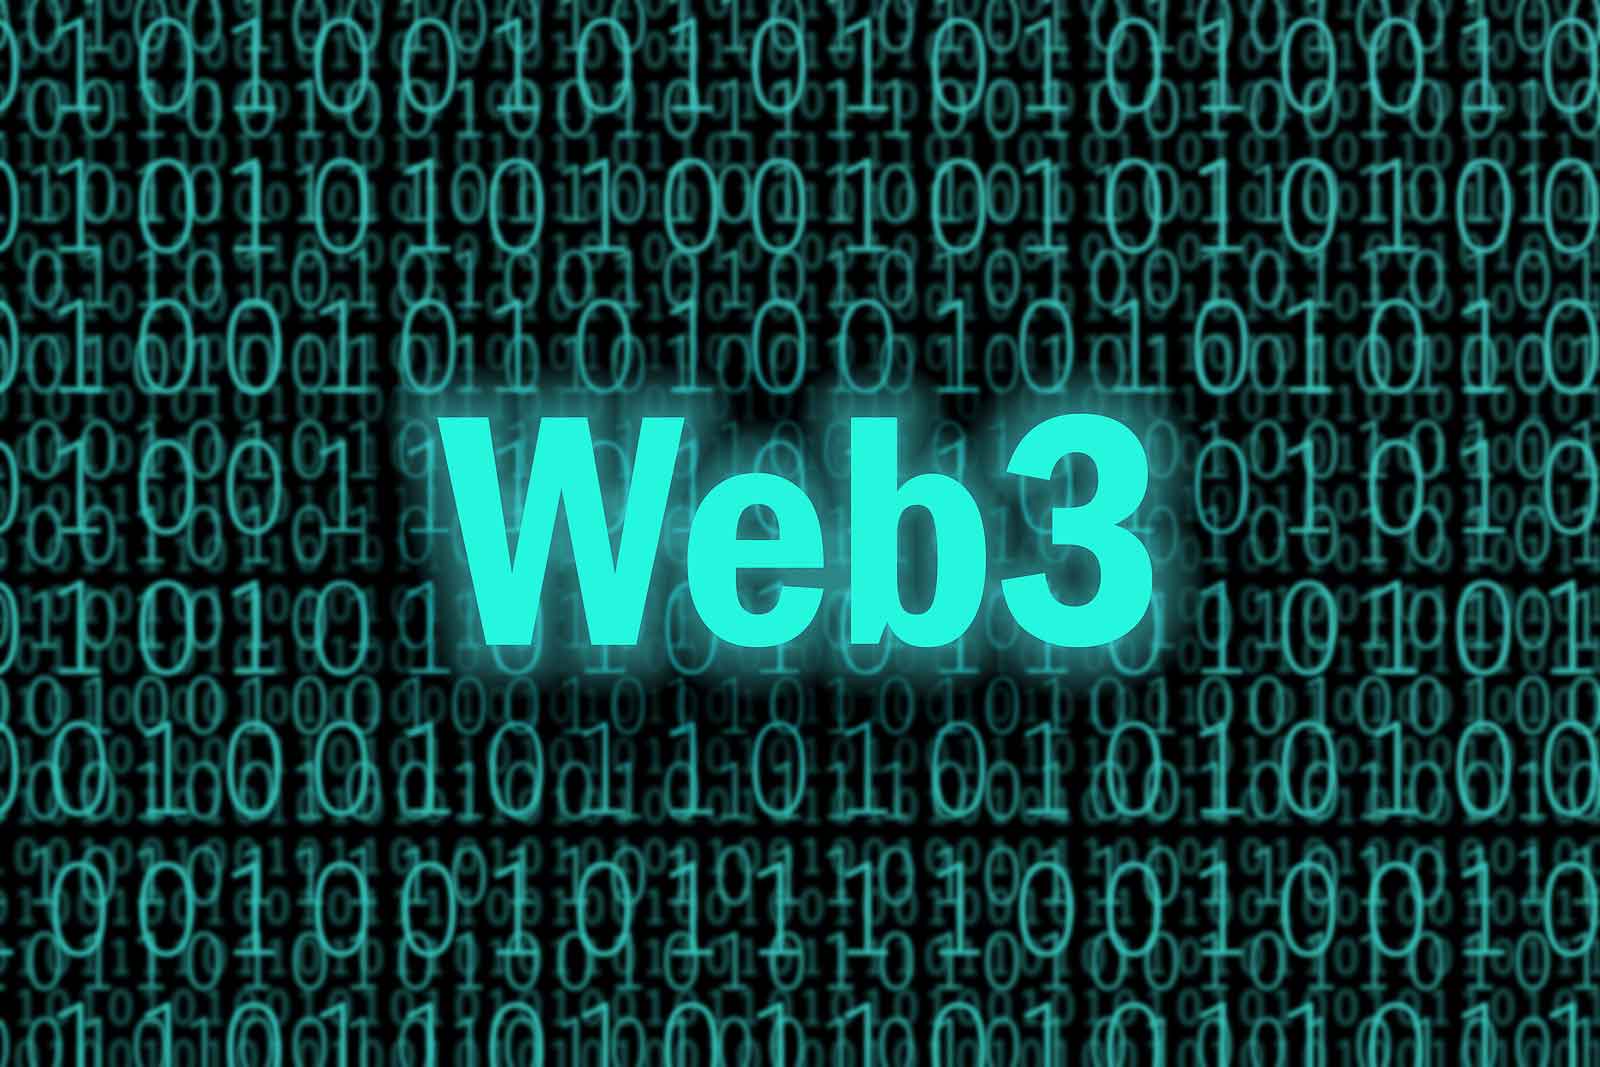 Web3 refers to the next version of the internet, which will focus on decentralization and user ownership. Find out how this future development may impact the internet and investing.